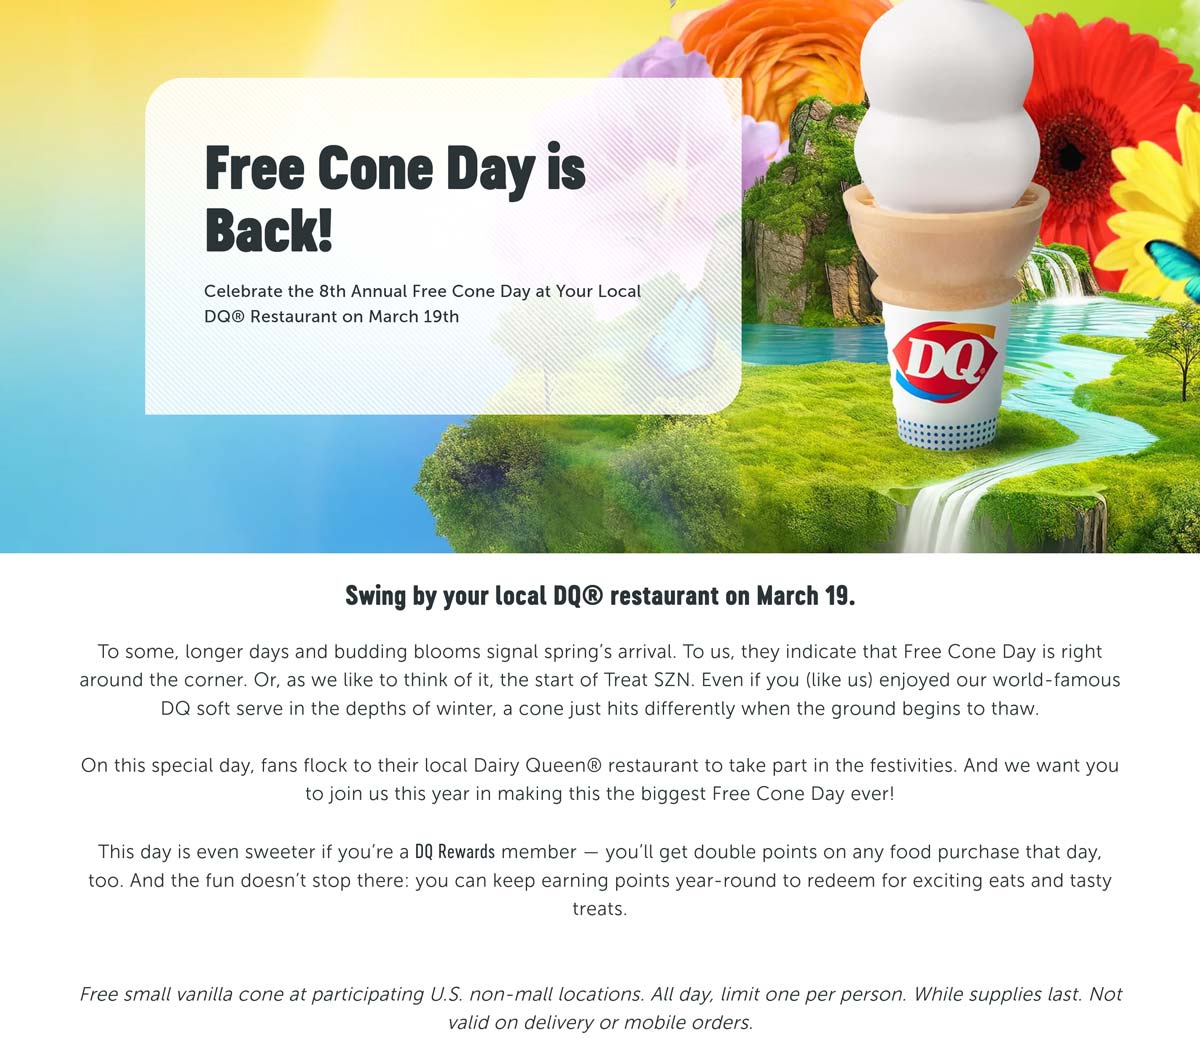 Dairy Queen restaurants Coupon  Free ice cream cone day the 19th at Dairy Queen #dairyqueen 